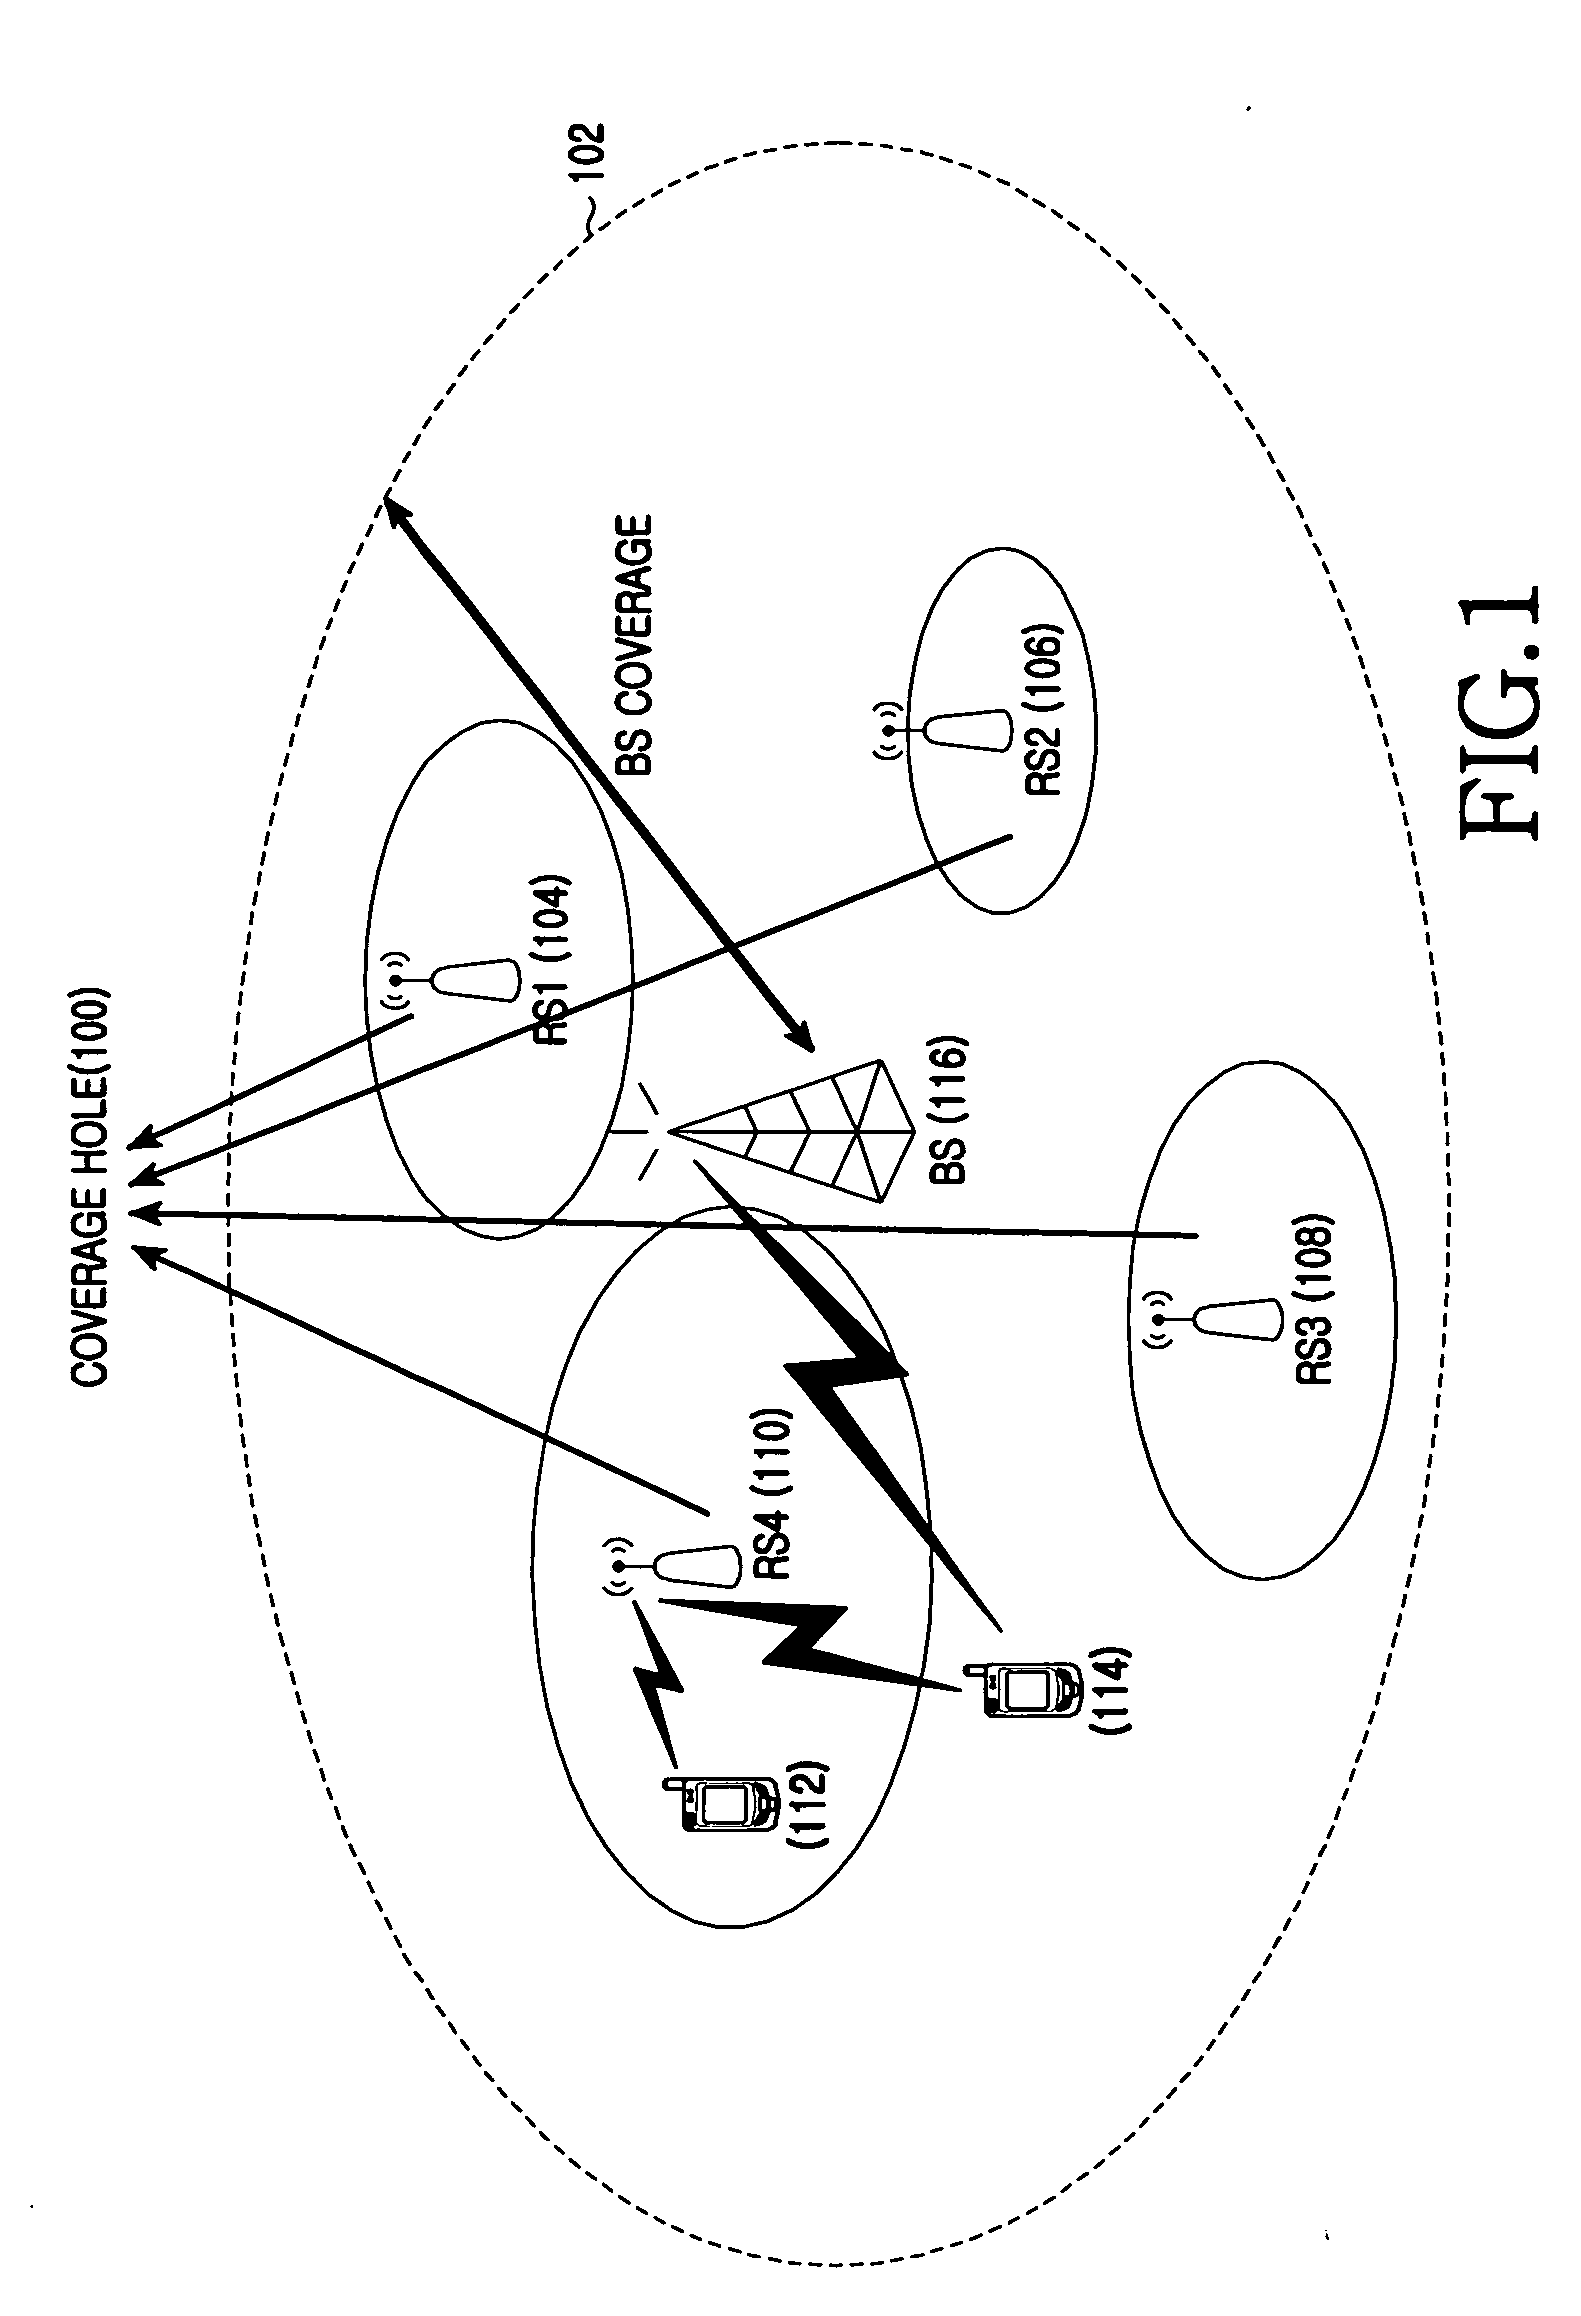 Frame structures, method and apparatus for resource allocation in wireless communications system based on full duplex replay